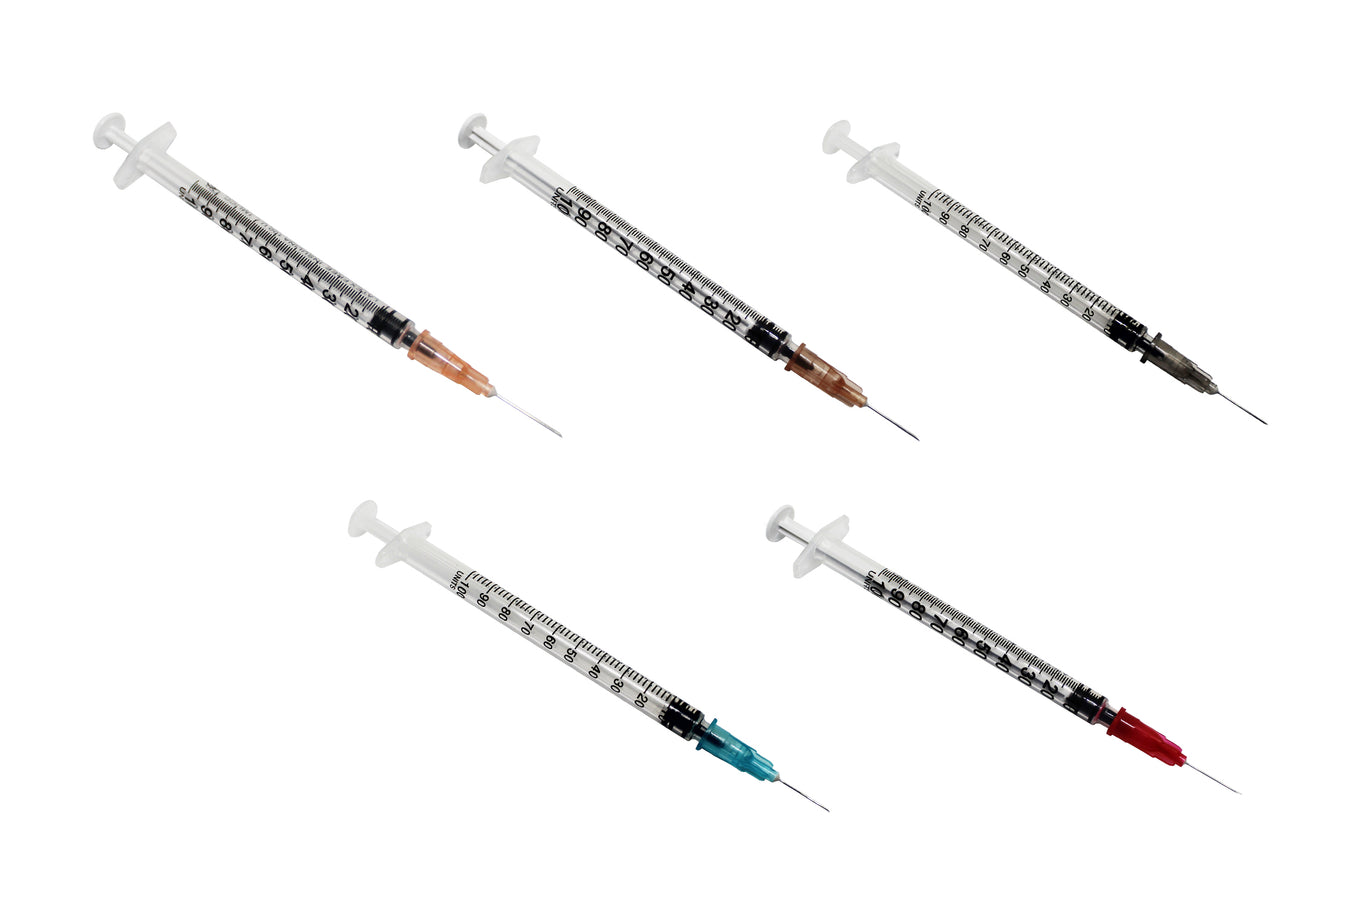 RayMed syringes and needles suppliers, sterile medical disposable suppliers 